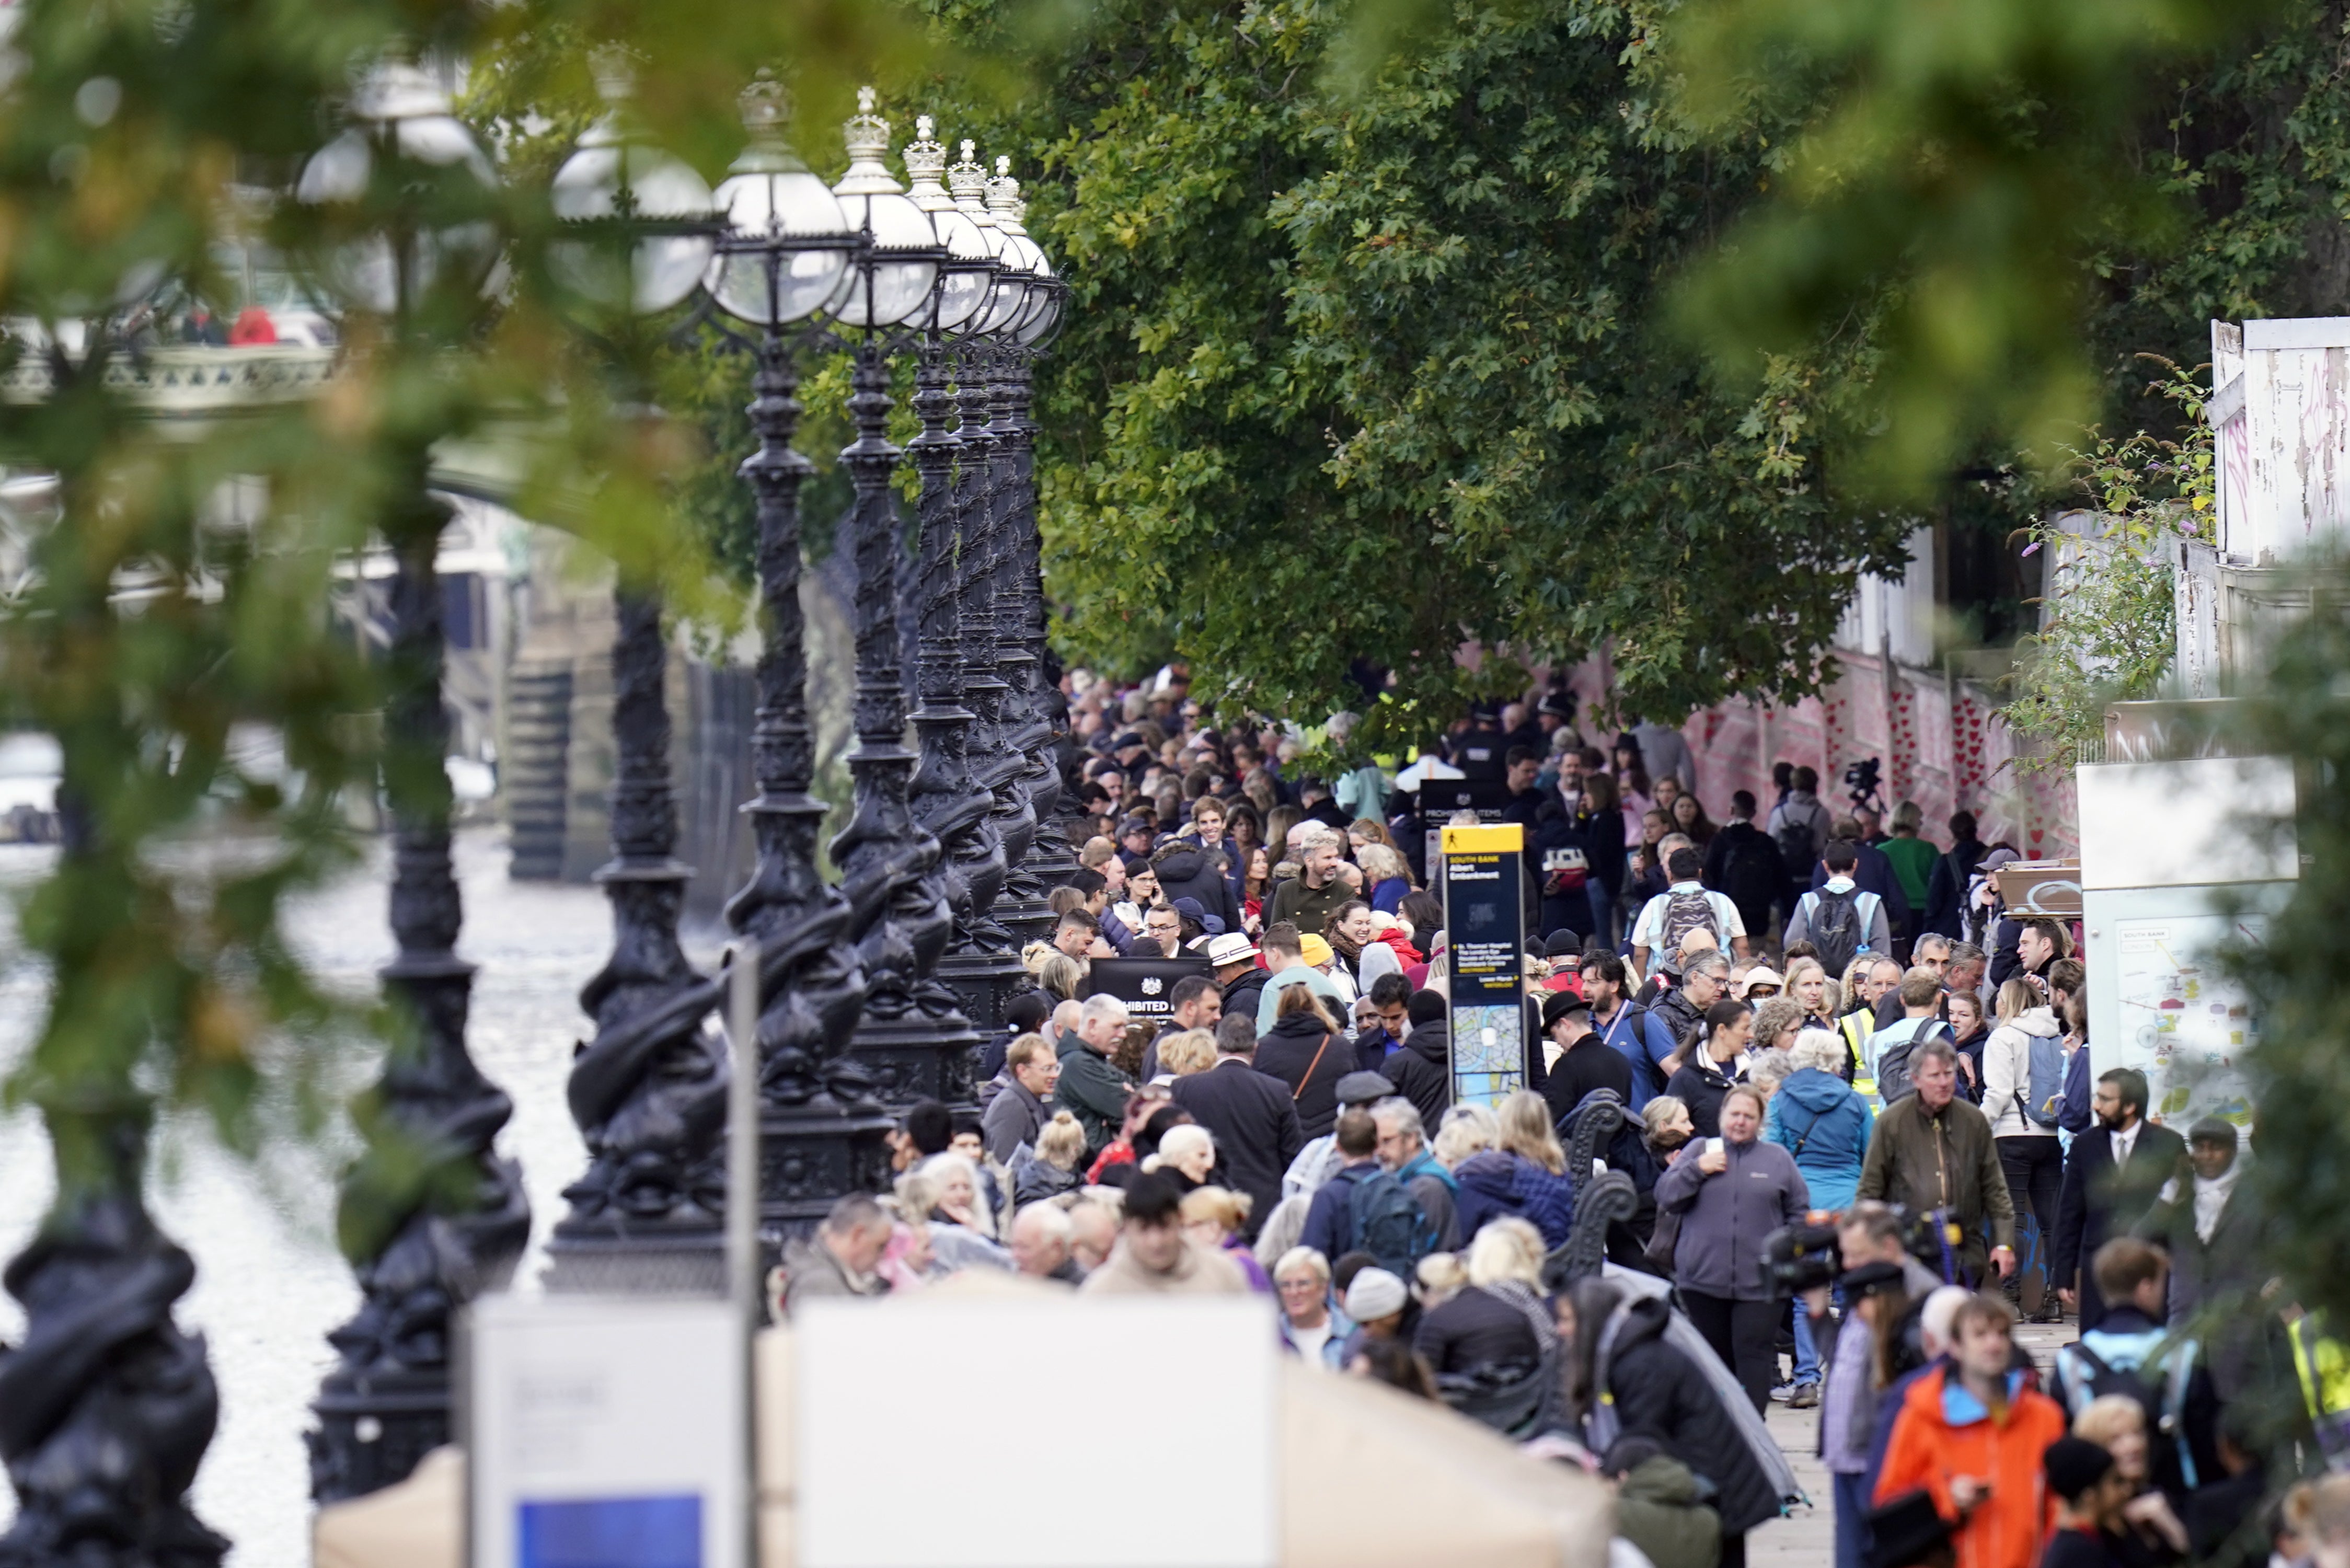 Members of the public wait in the queue near Lambeth Bridge to view the Queen lying in state (Danny Lawson/PA)